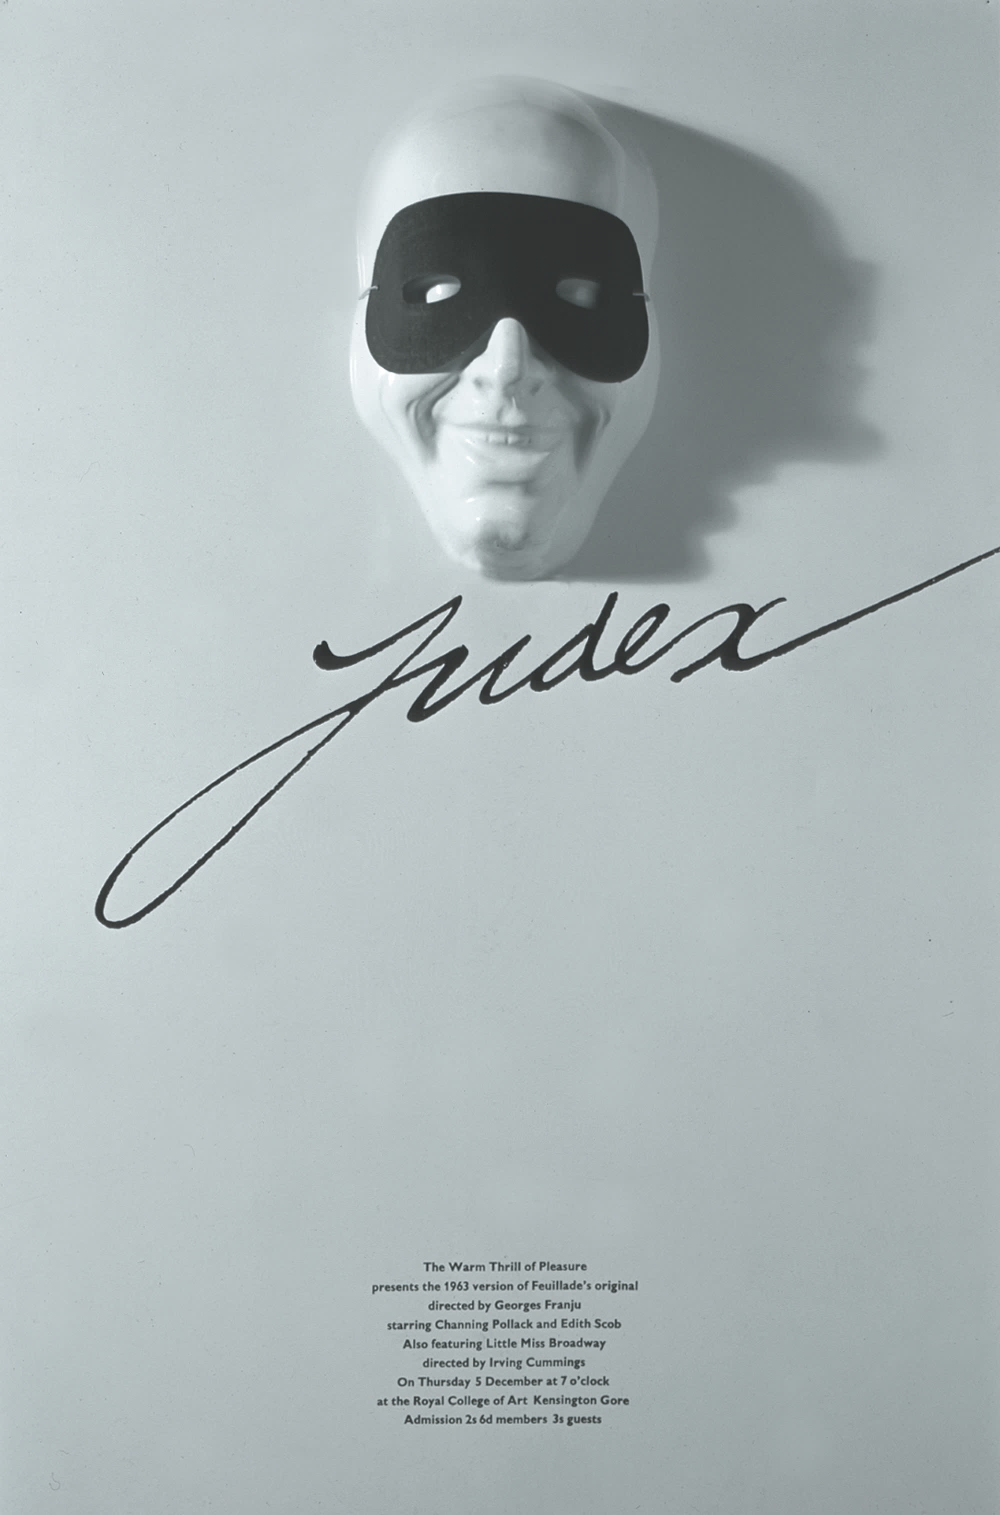 Poster for Judex by John Pasche